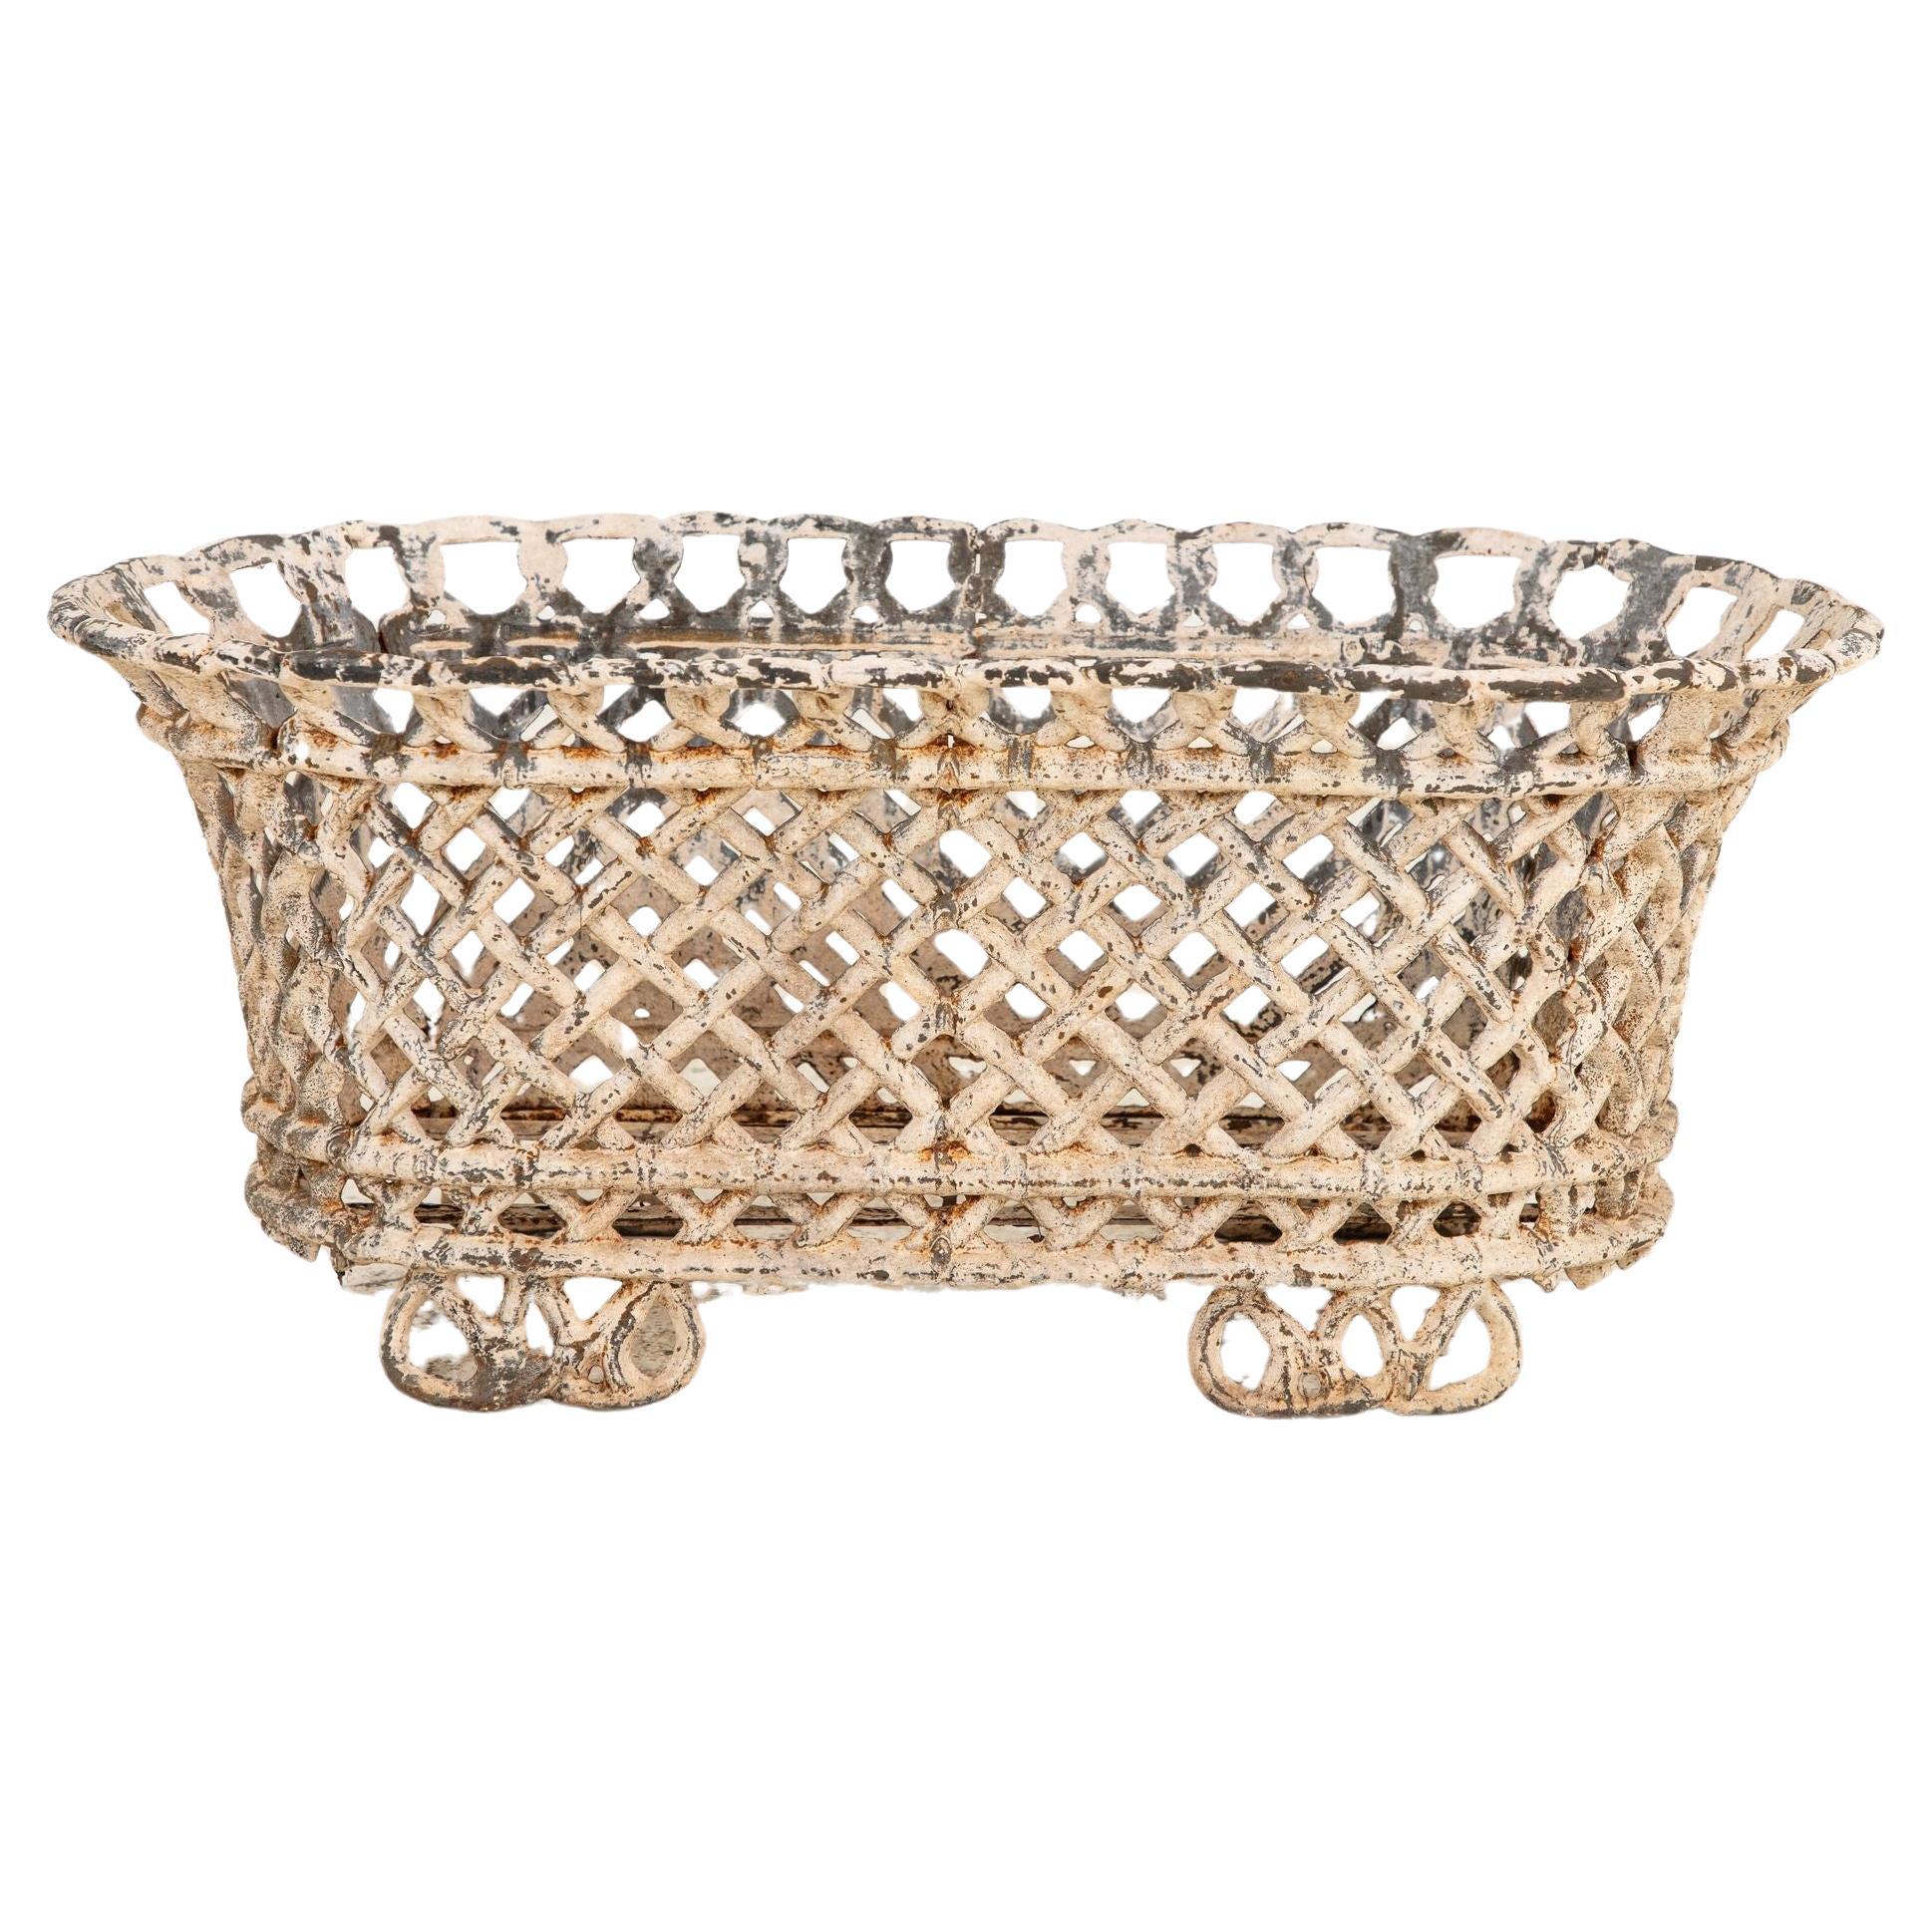 White Painted Cast Iron Latticework Basket, French early 20th C. For Sale